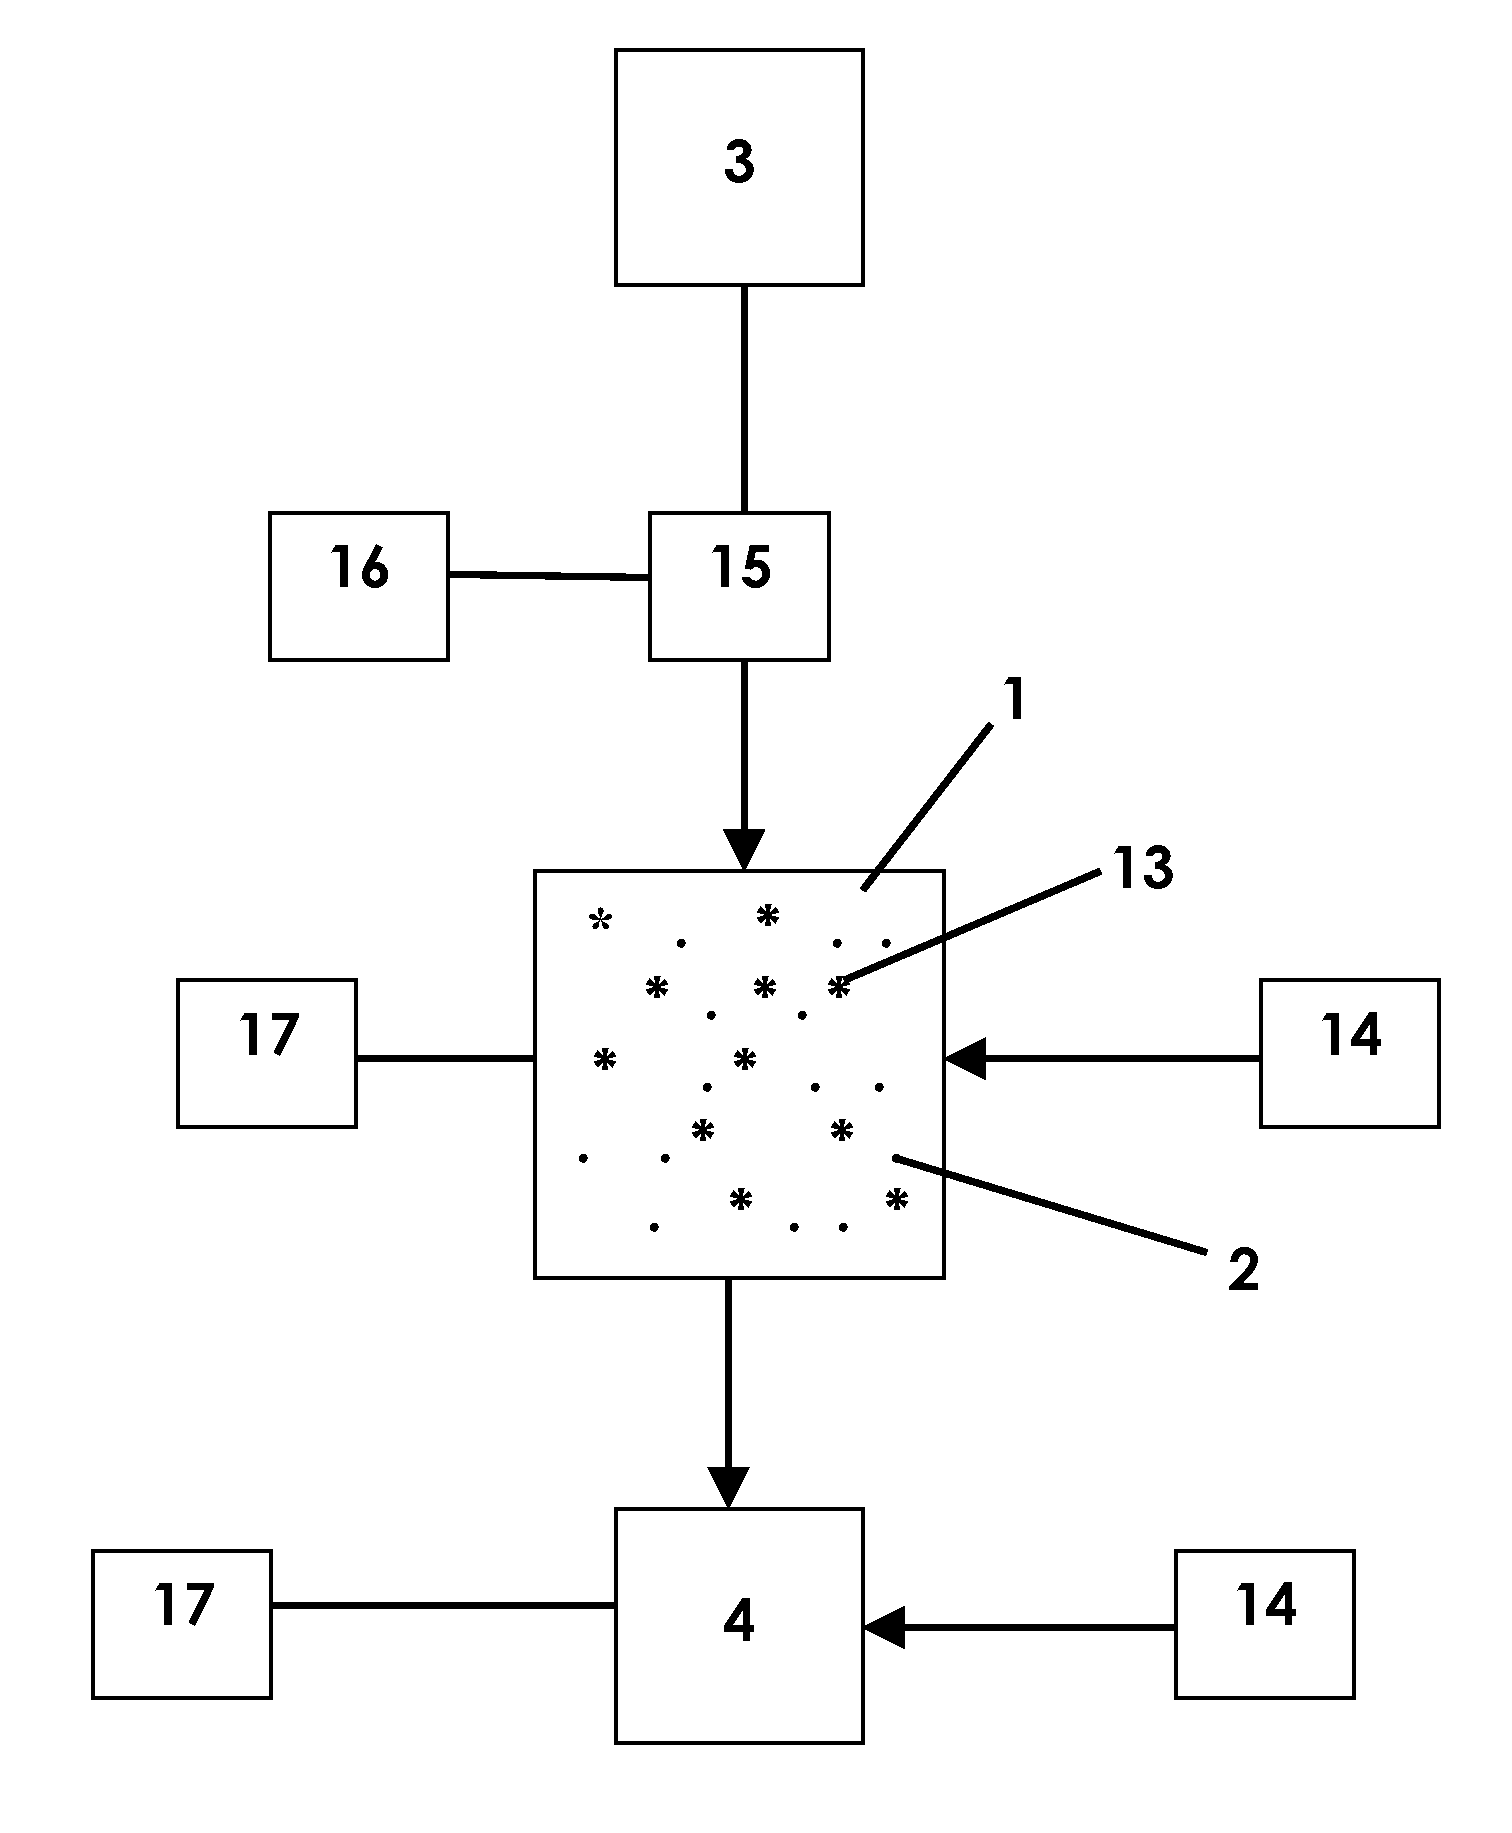 In-situ contaminant remediation systems and methods